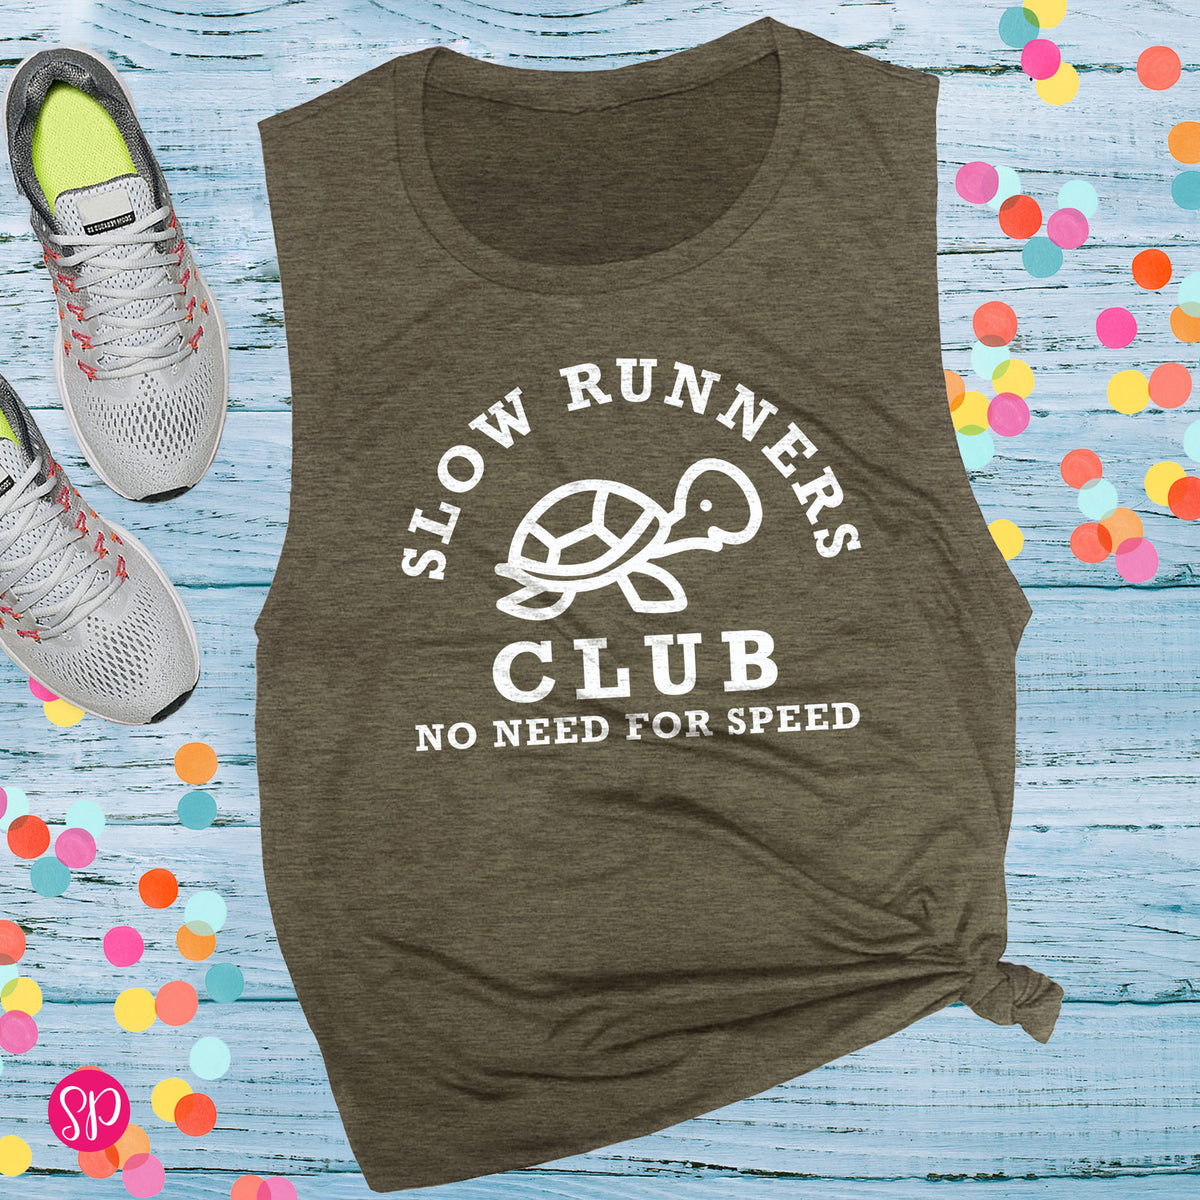 Slow Runners Club No Need for Speed Funny Turtle Running Run Race Group Matching Workout Fitness Tank Top Shirt